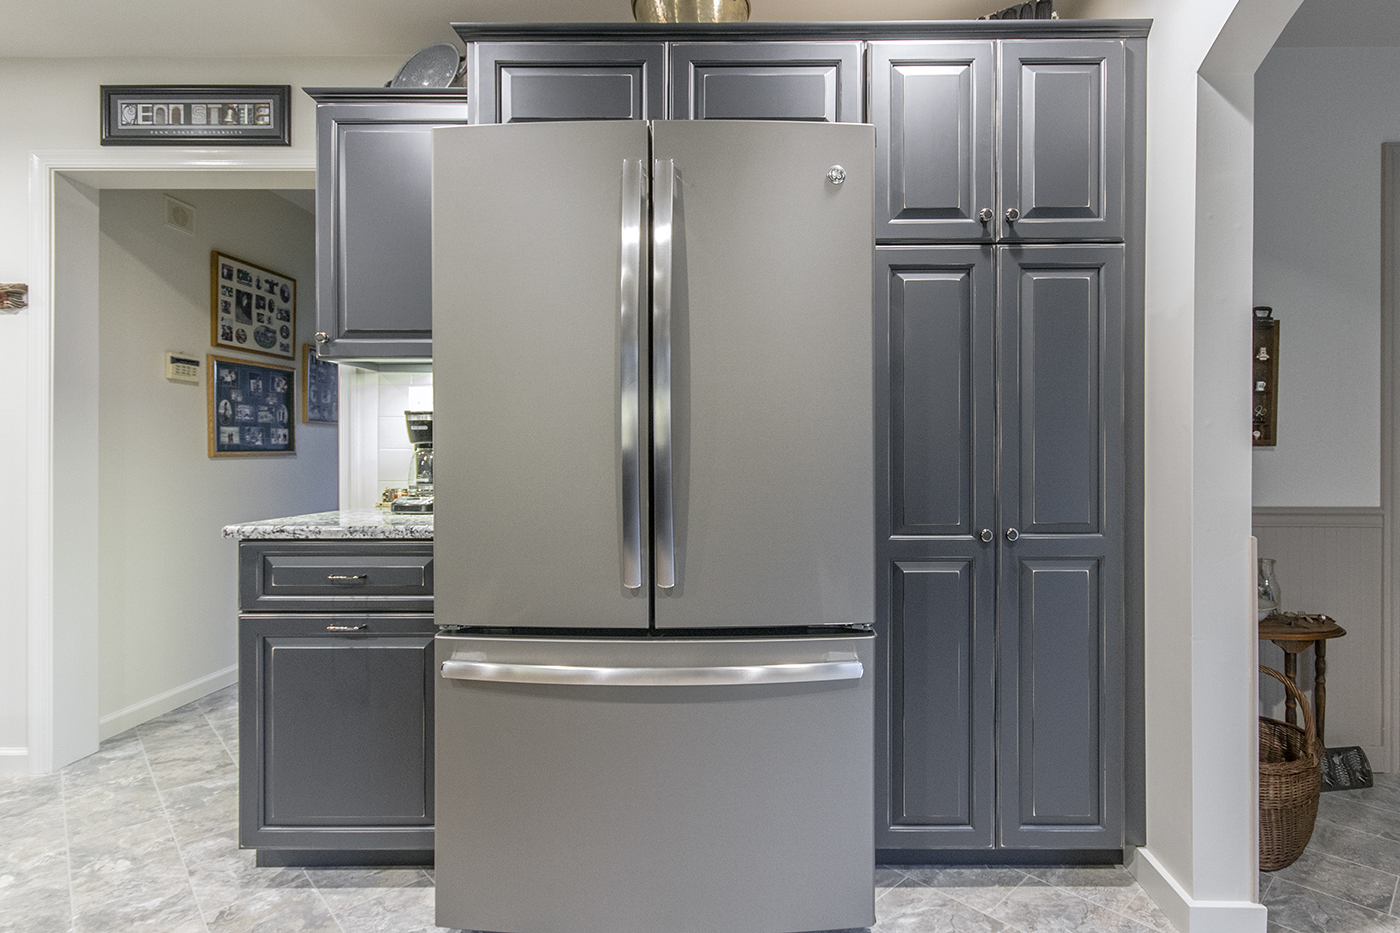 A refrigerator and cabinets.